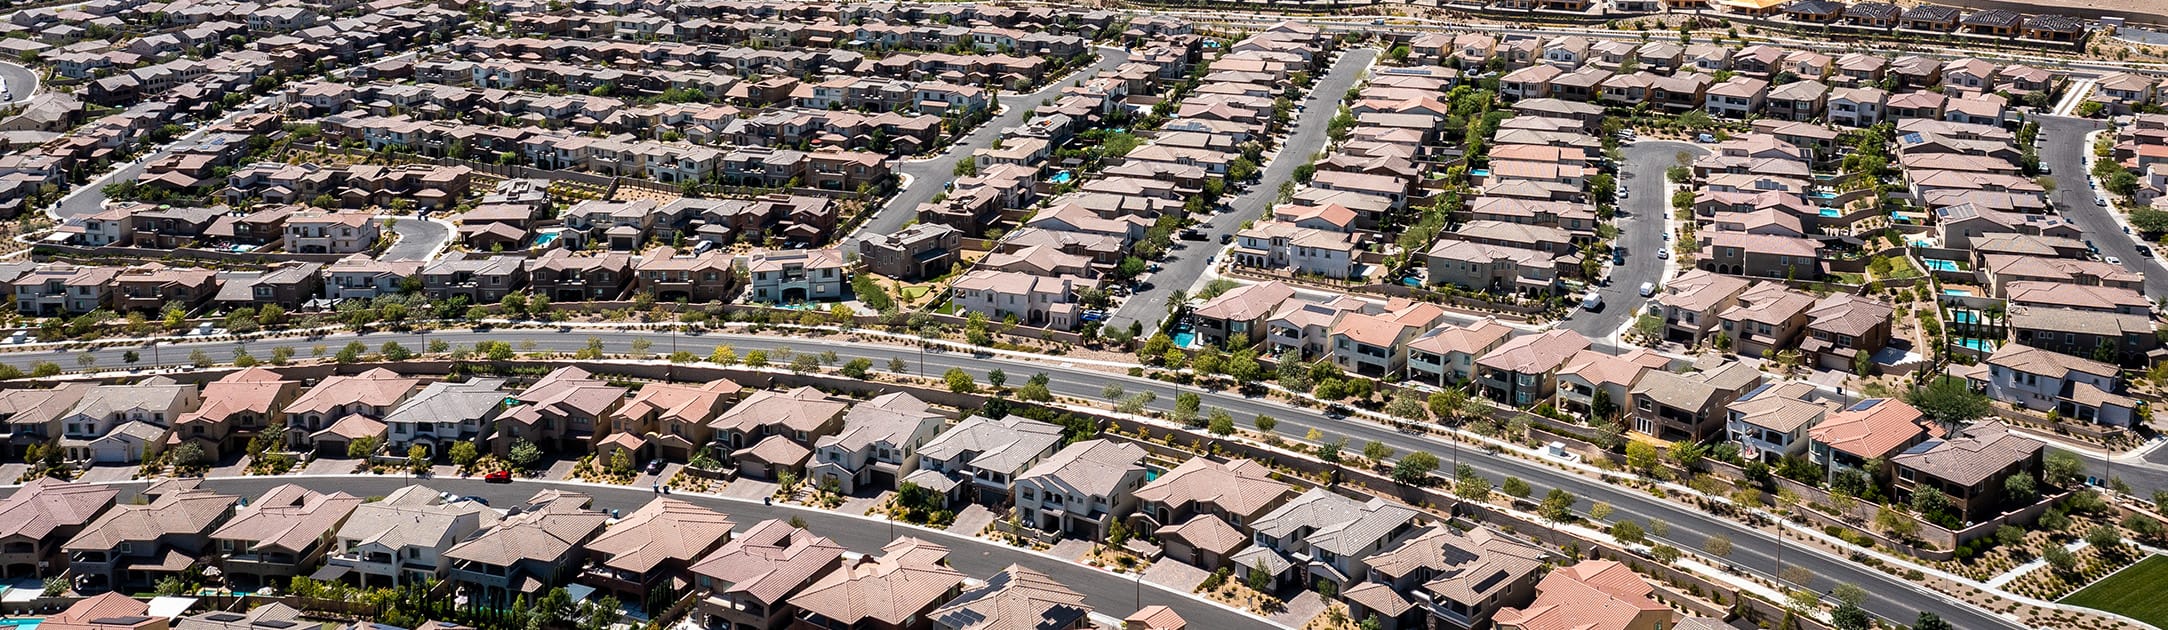 Aerial view of neighborhood with simi circle street in front.